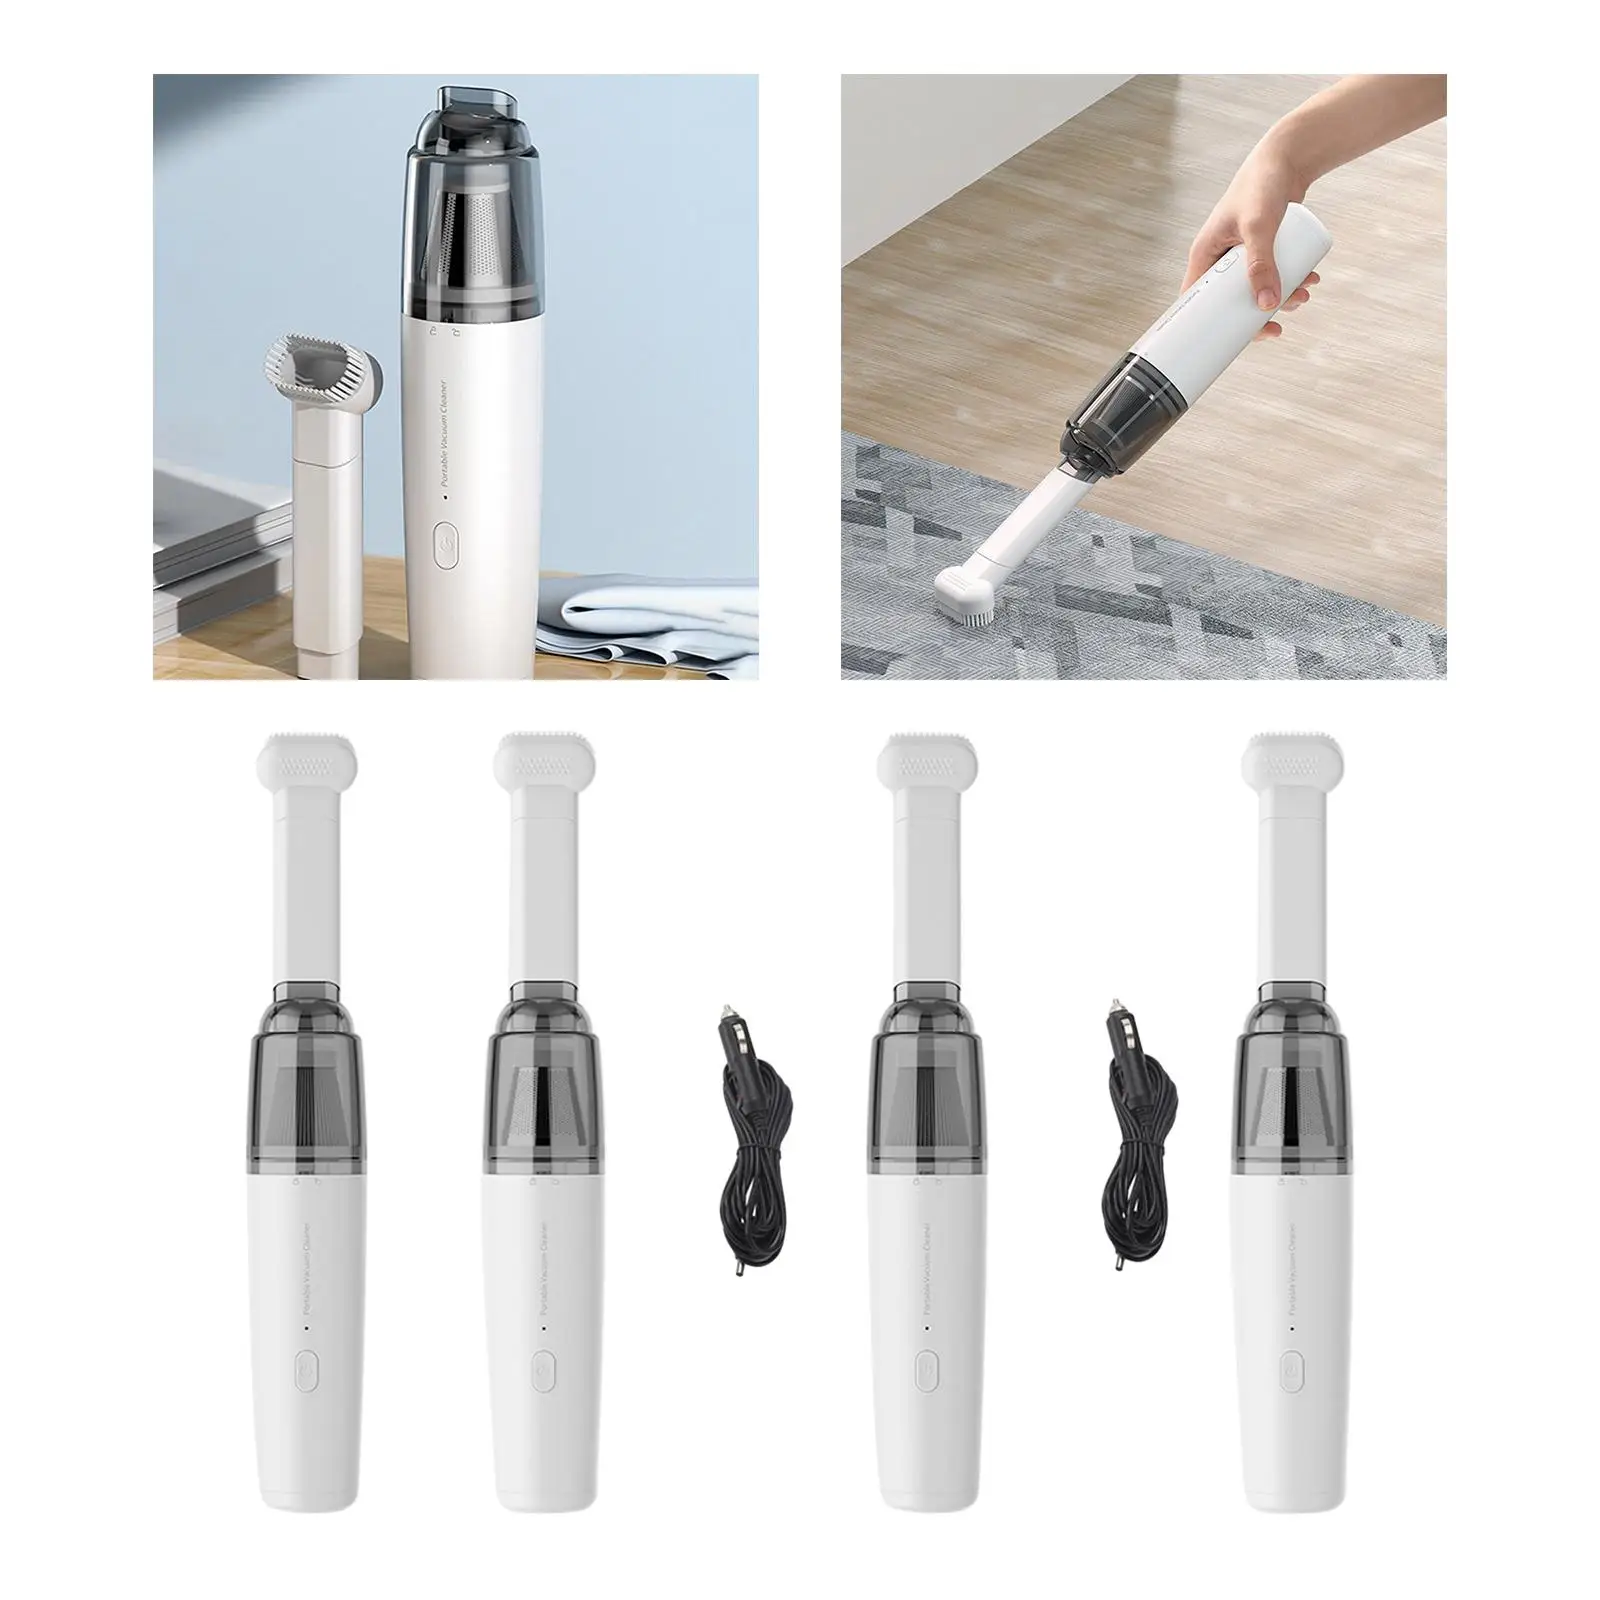 Portable Handheld Vacuum Cleaner High Power 130ml Dustbowl 13000PA Accessories Lightweight for Office